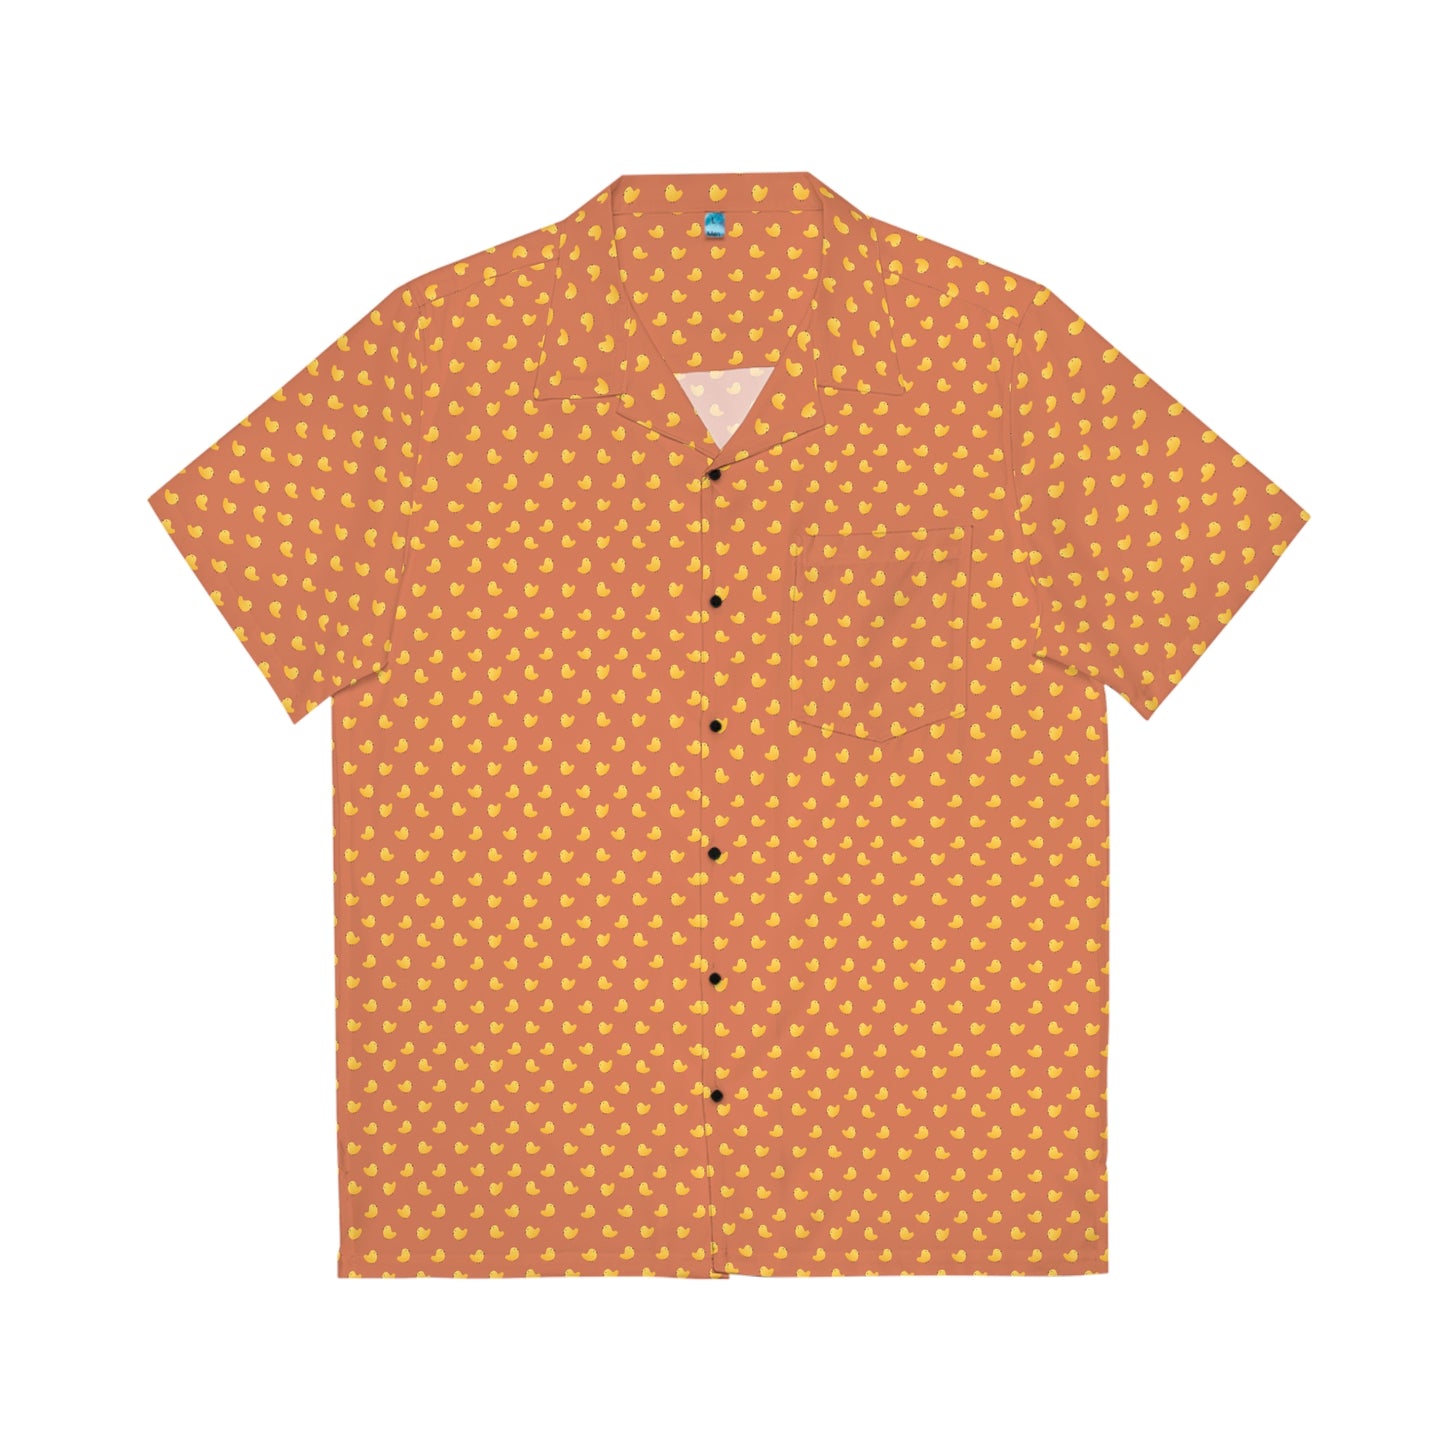 Li'l Chicky - Carry On Crow Clothing Co. - vibrant orange shirt with cute cartoon chick pattern - button up bird print shirt- front